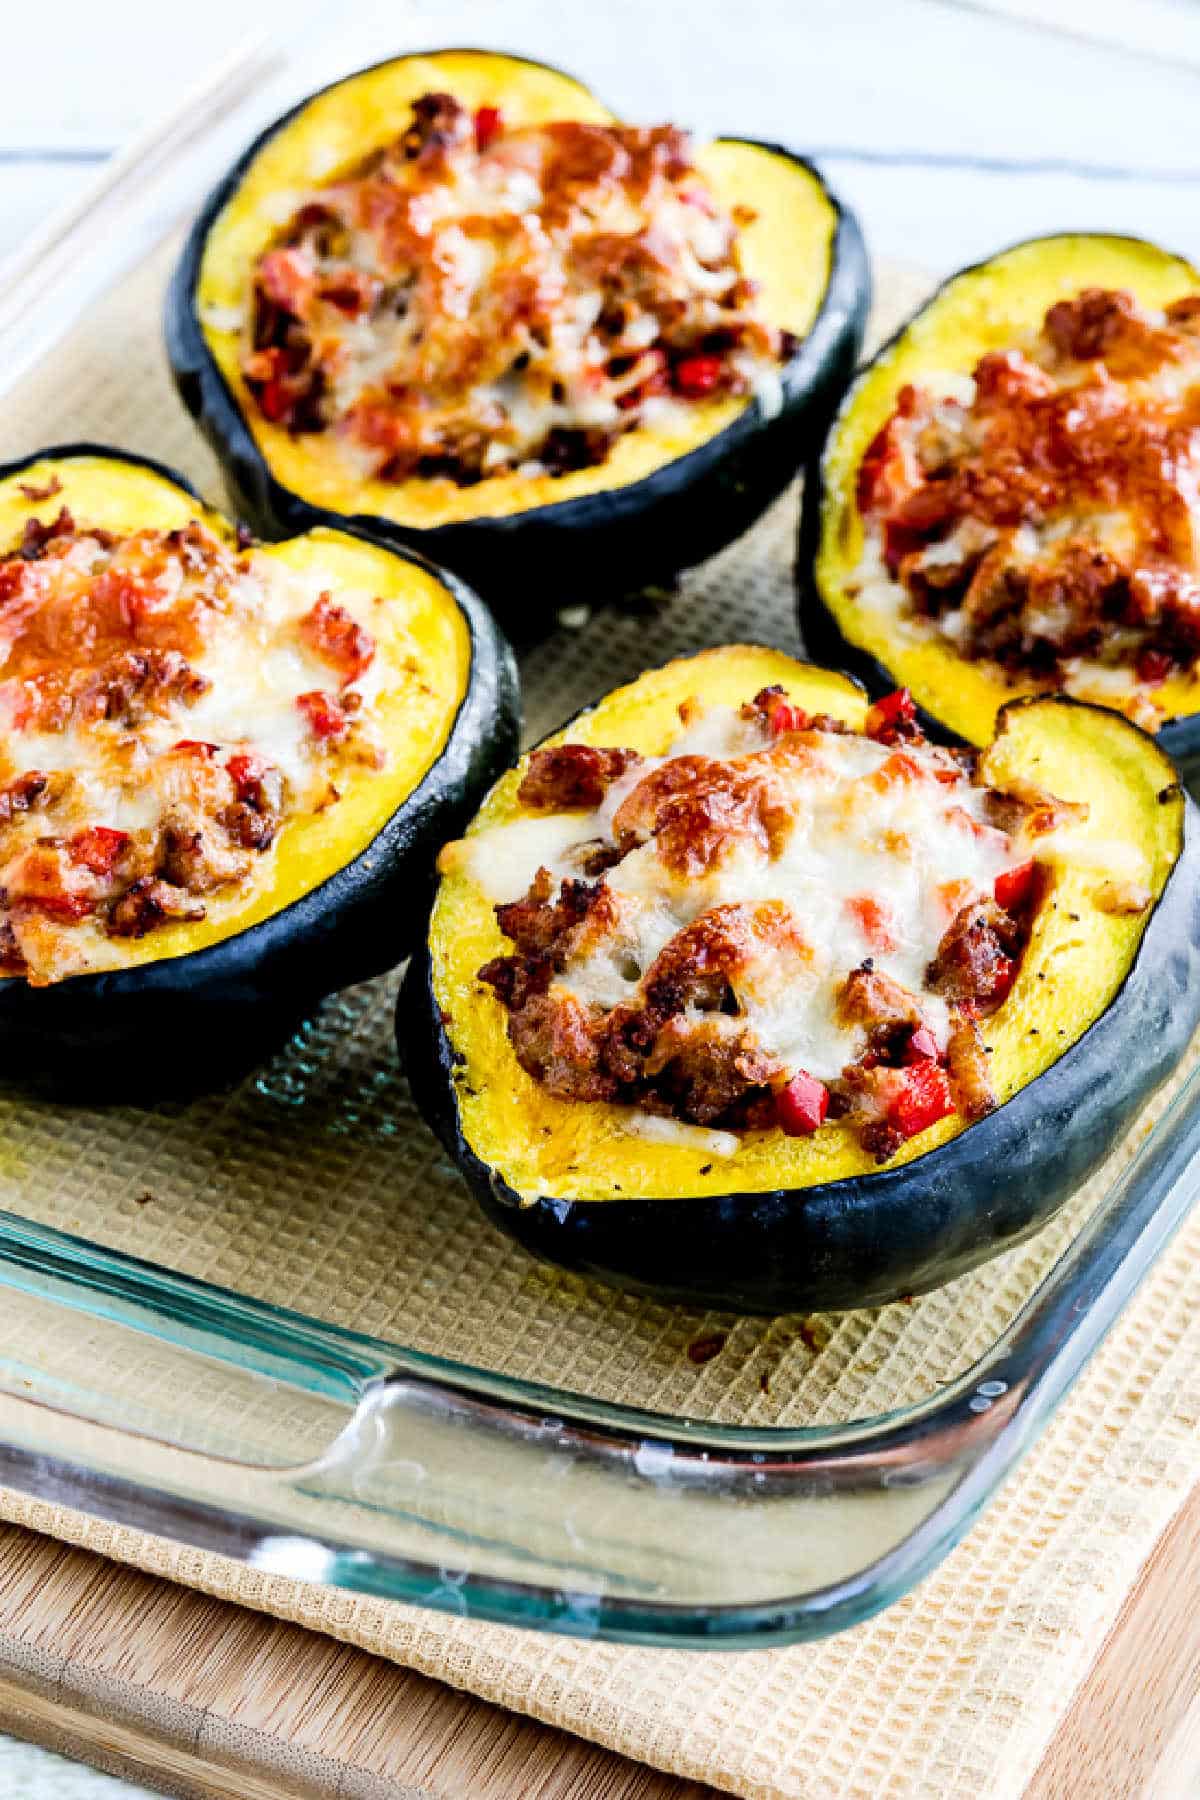 Sausage stuffed with acorn squash as shown in baking dish